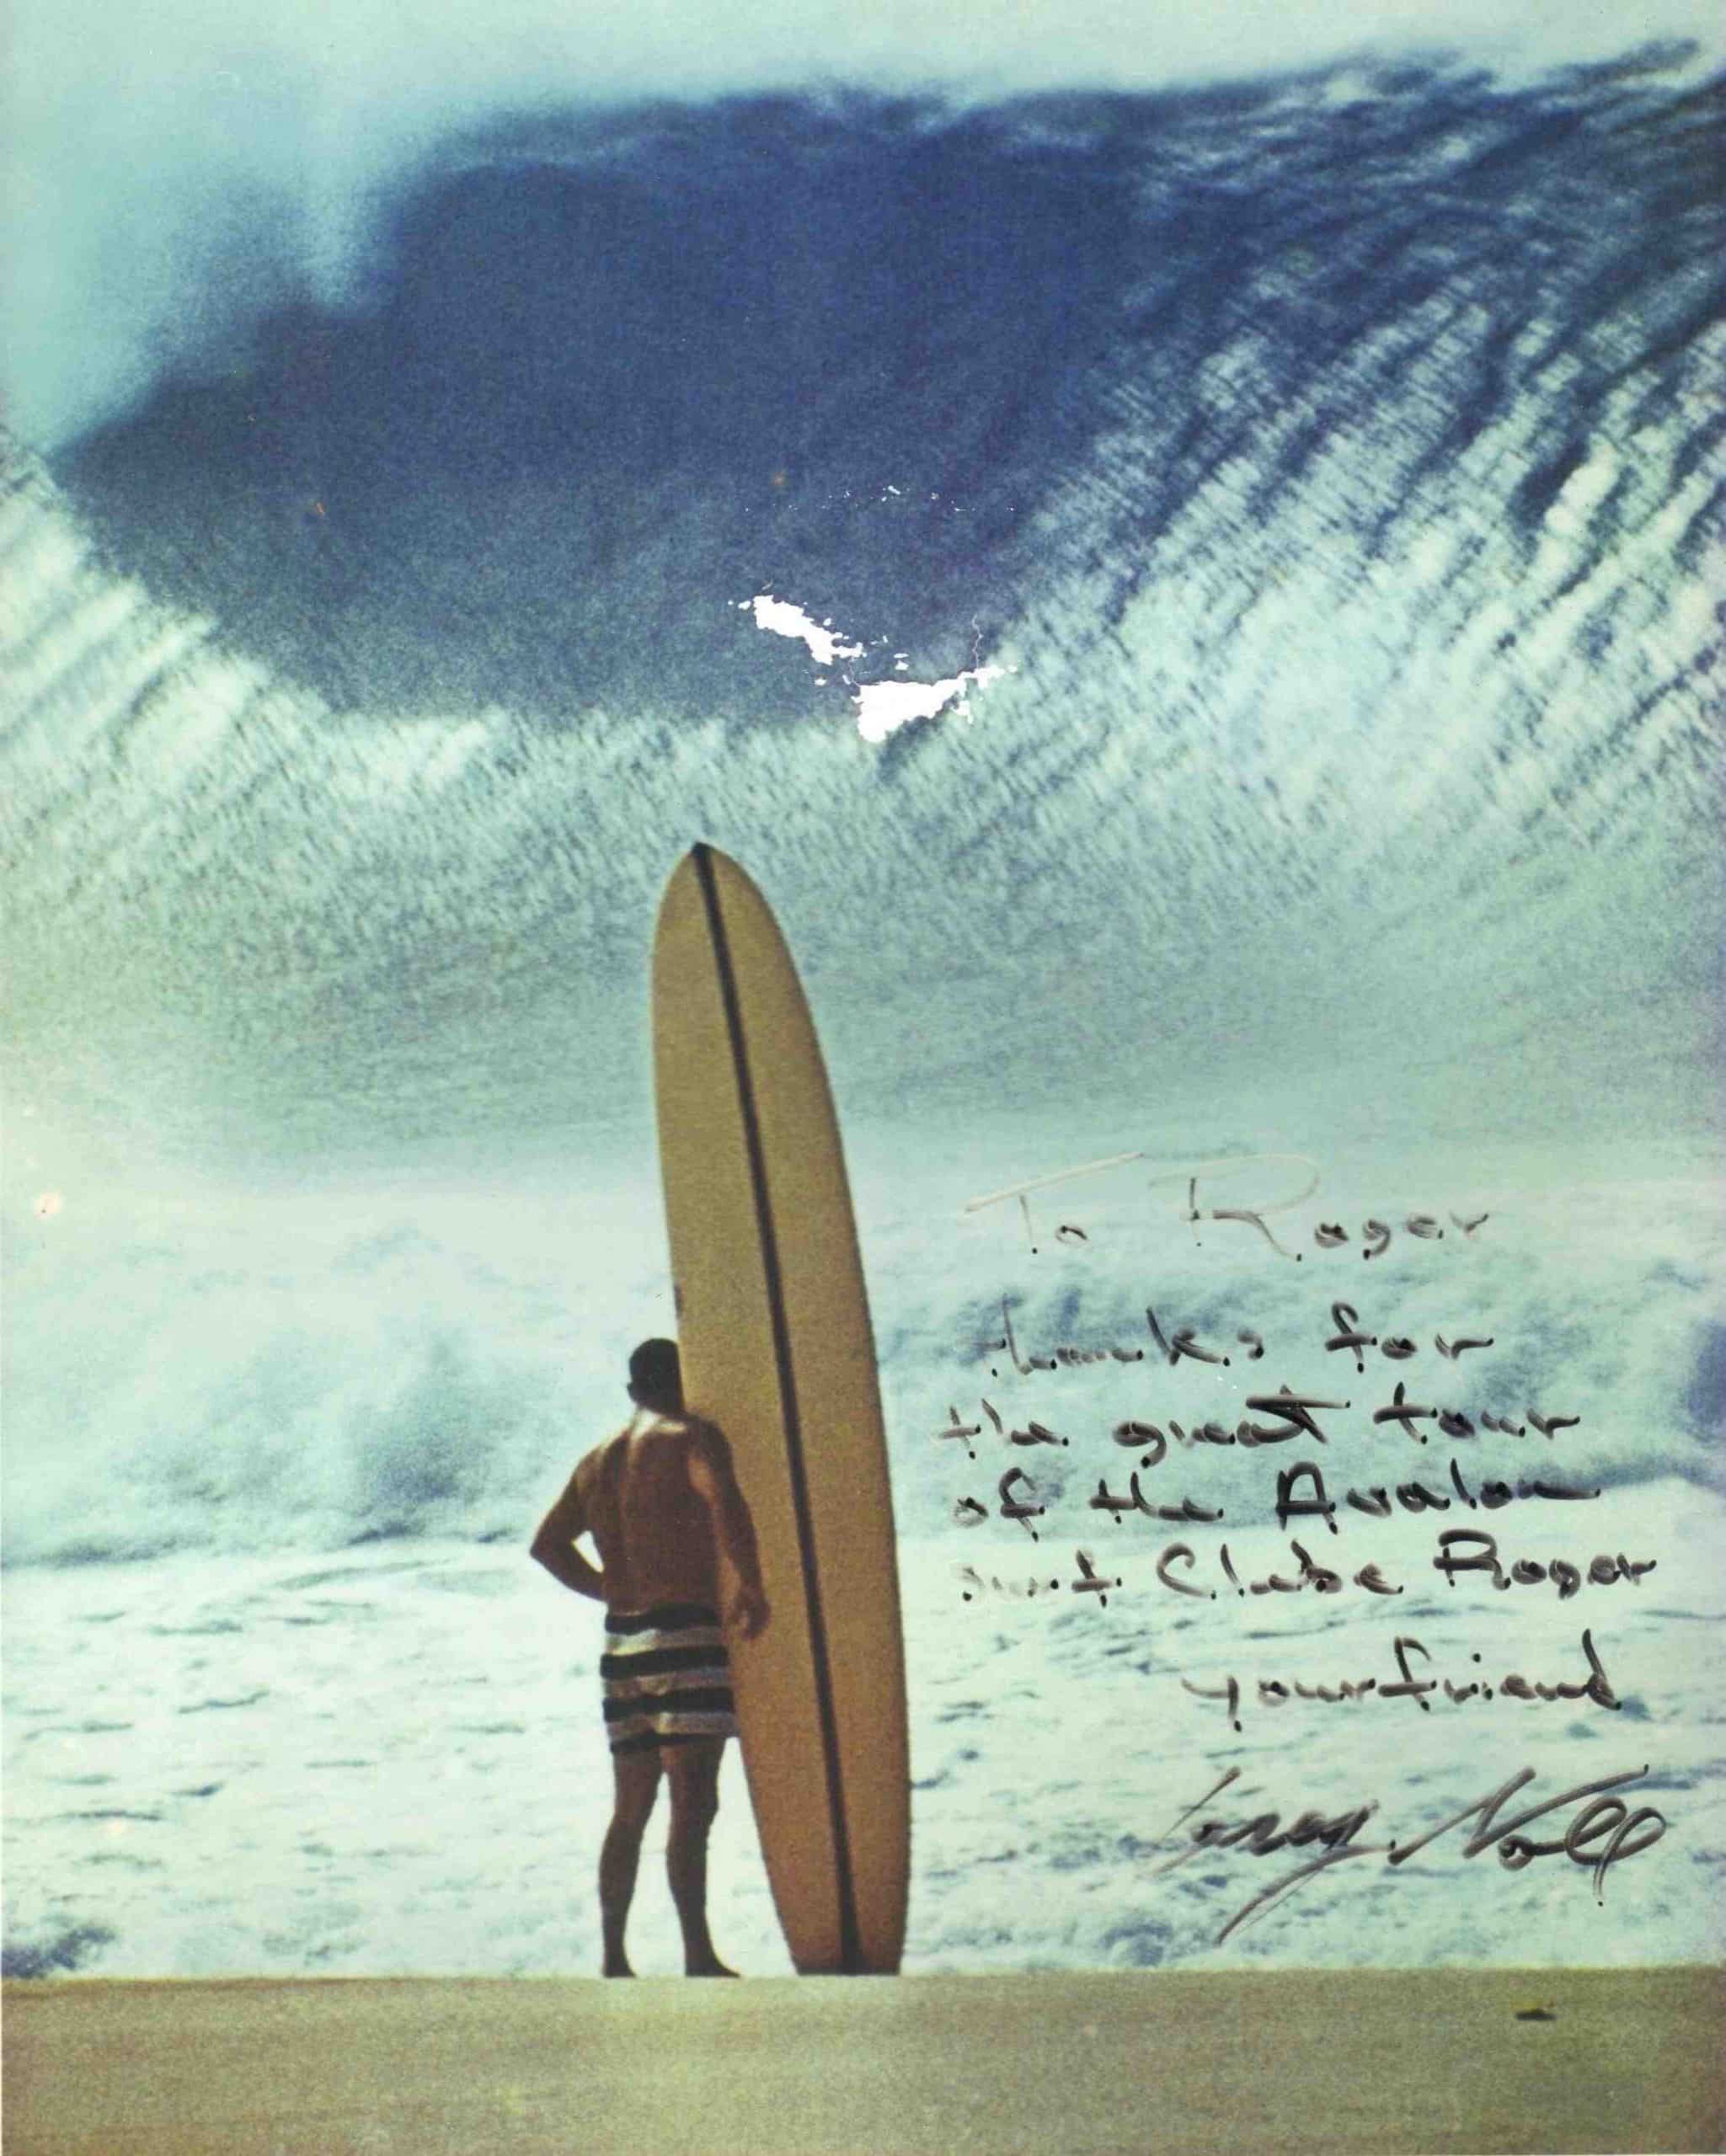 Who is the most famous male surfer?